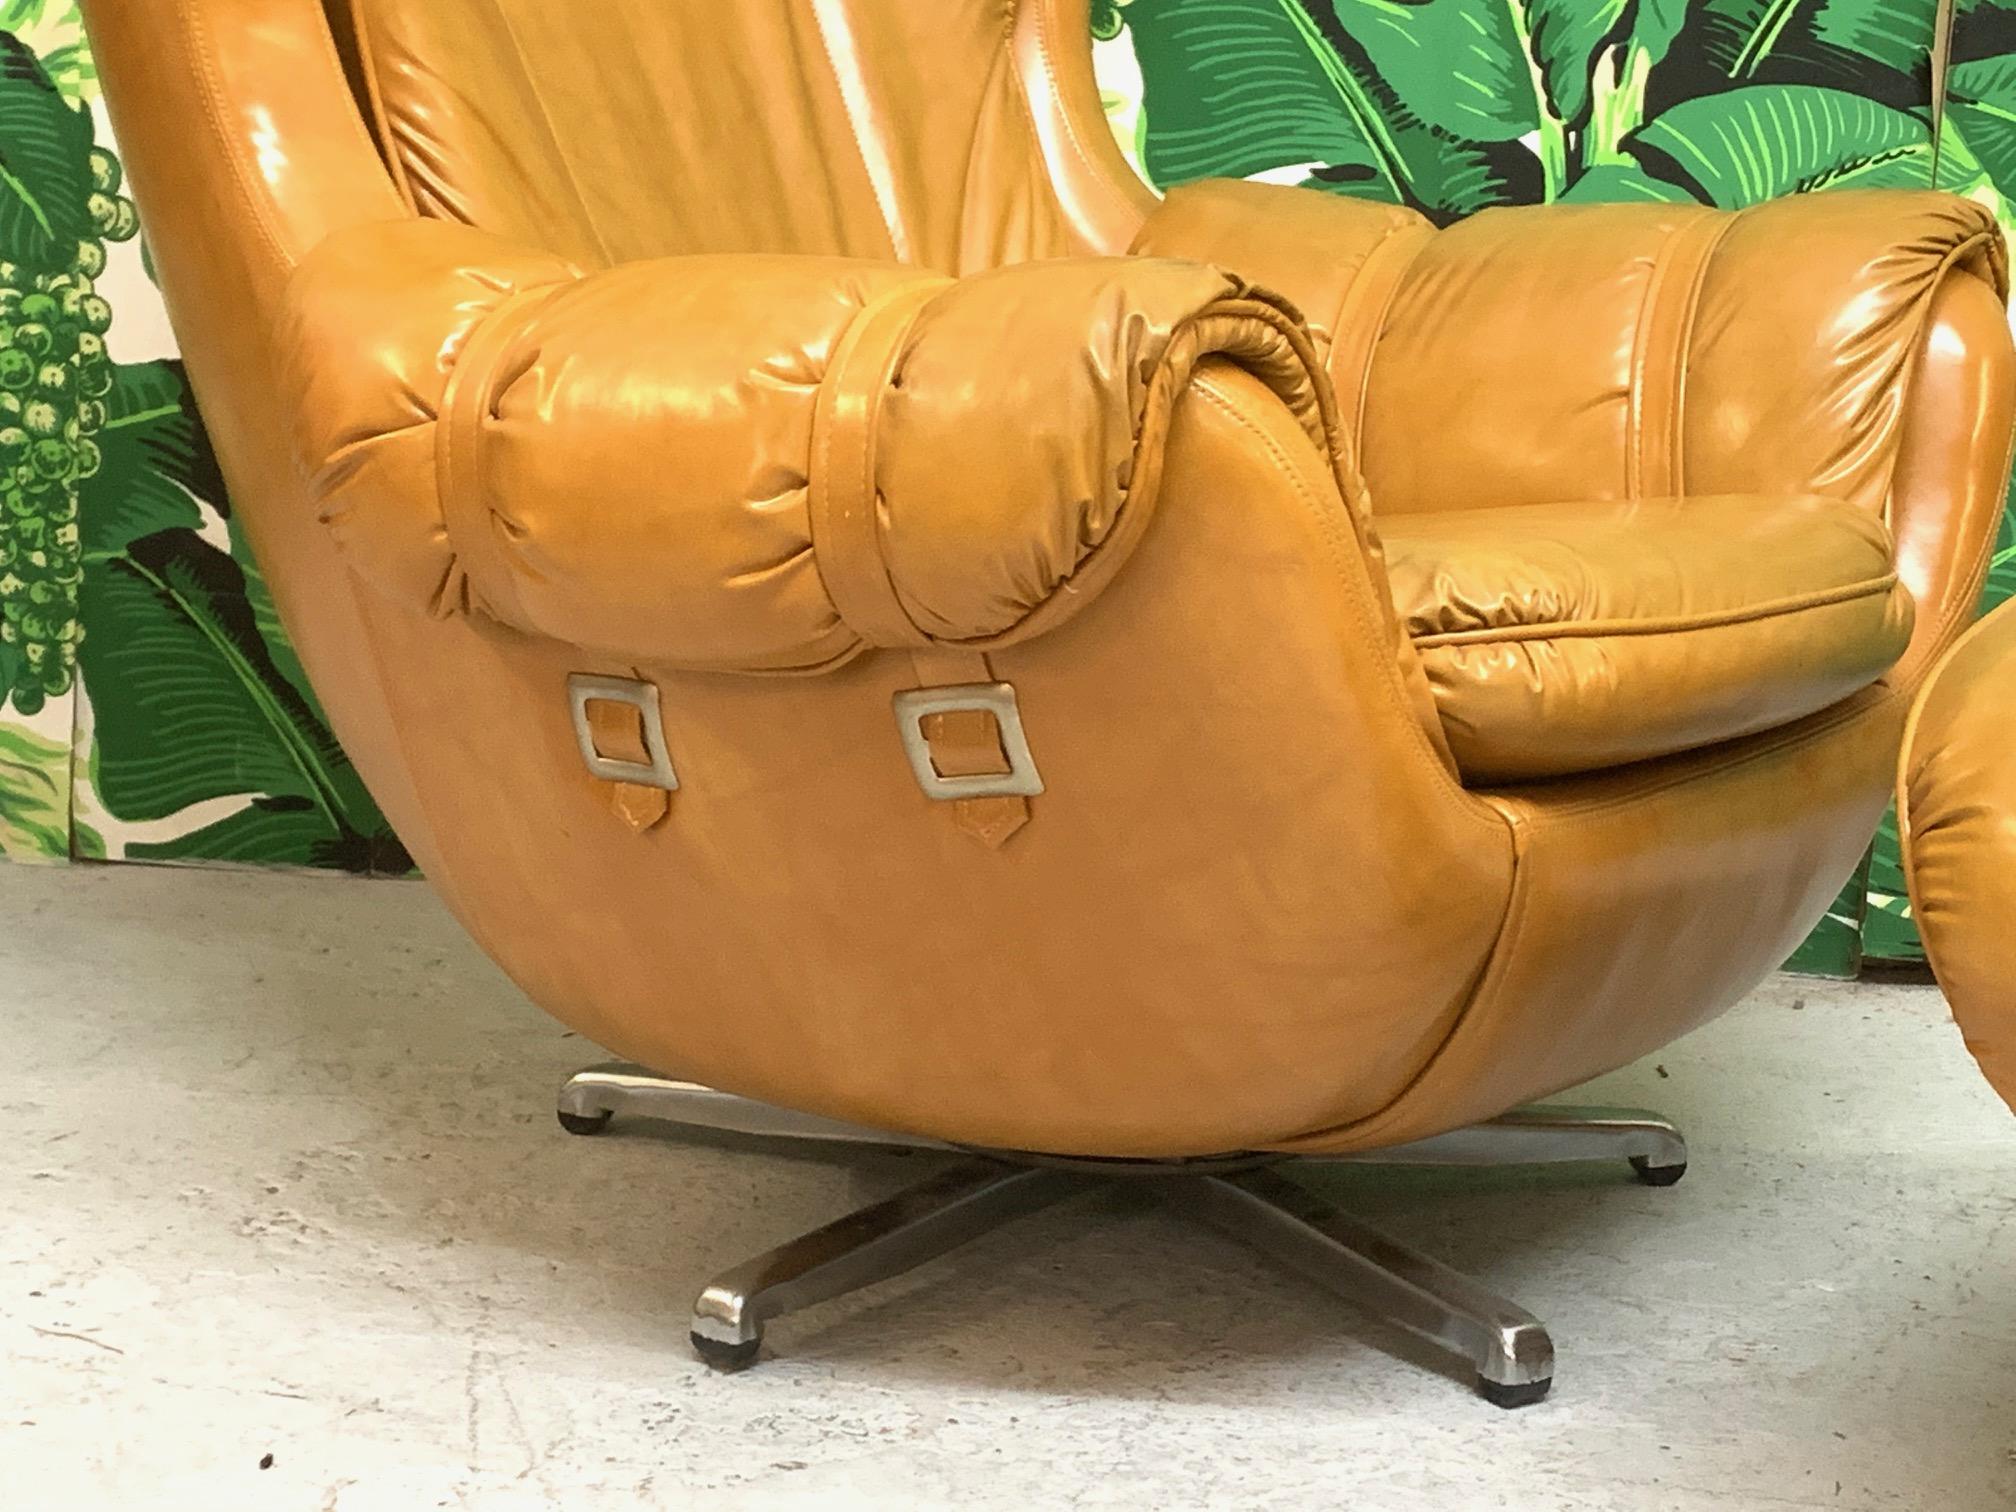 lounge chair with ottoman